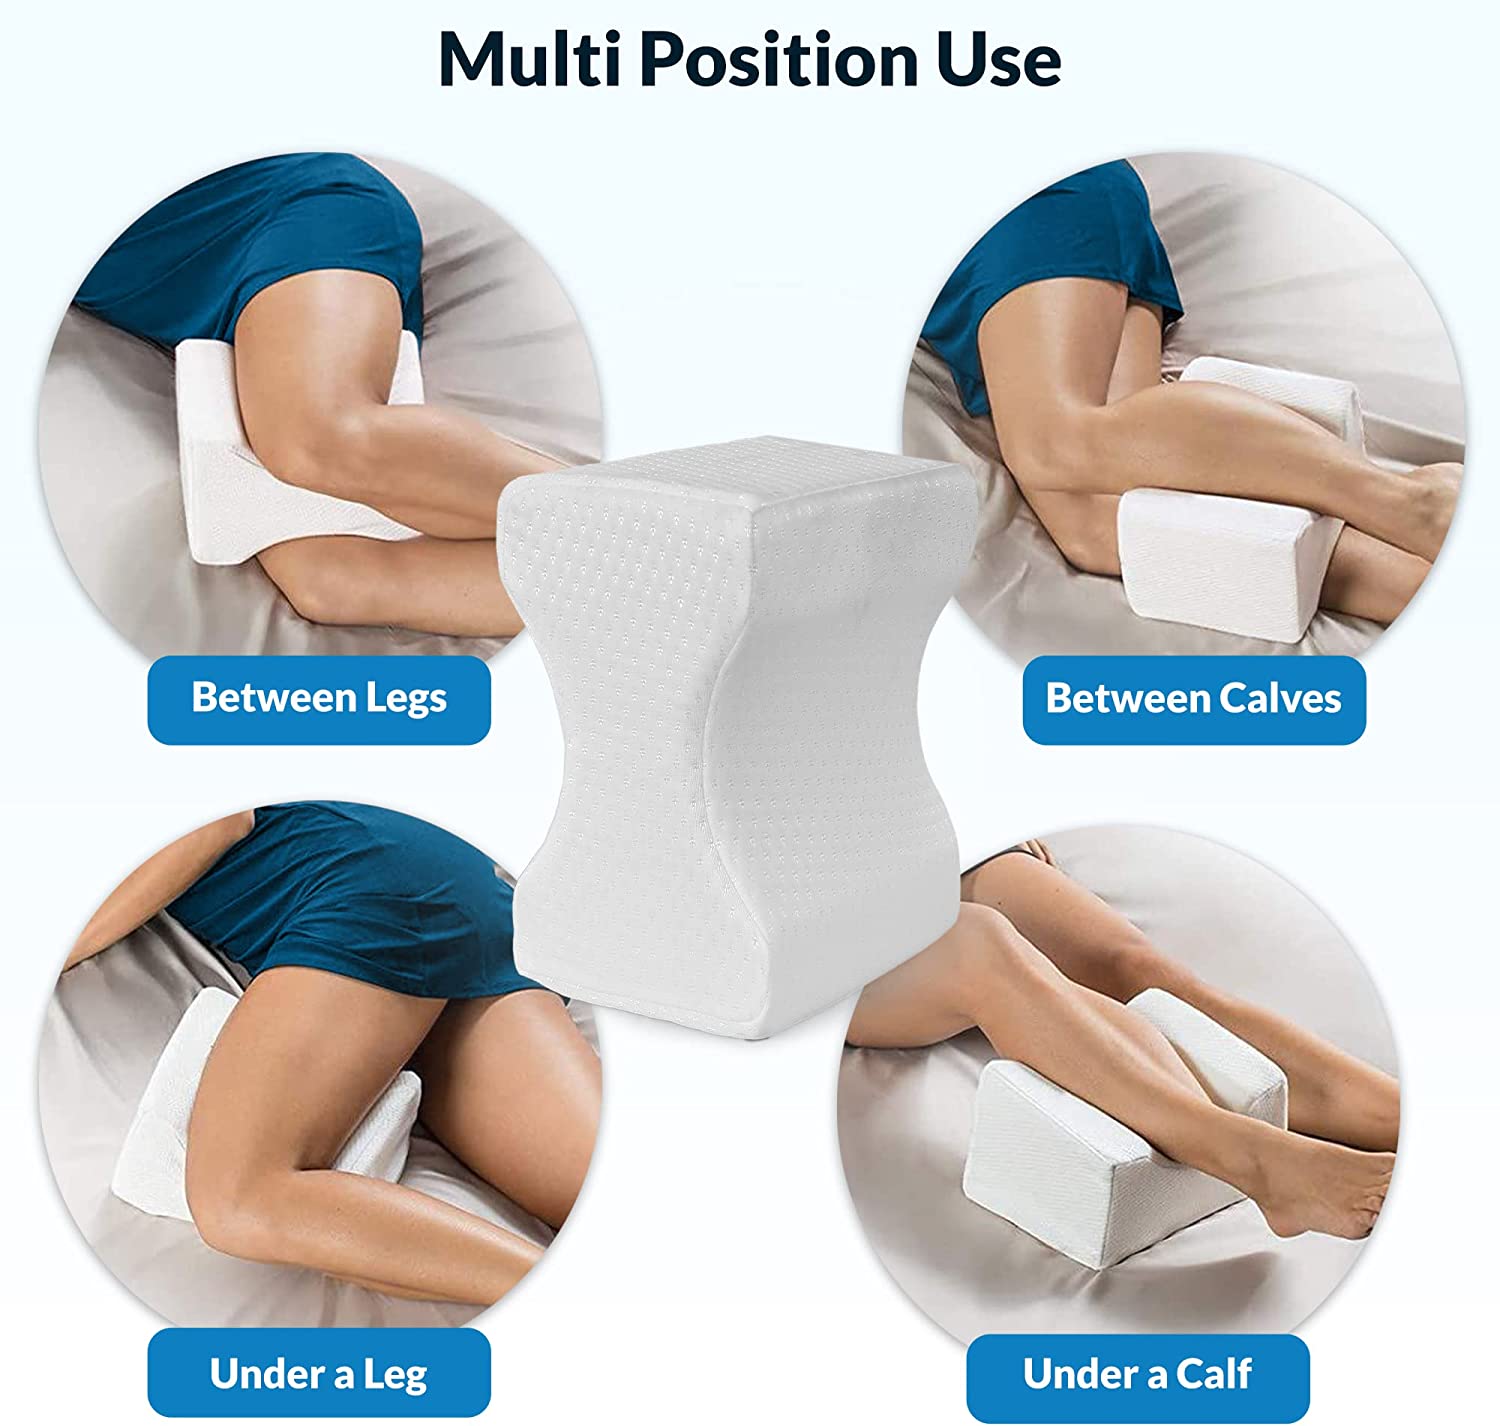 Knee Pillows for Side Sleepers - Leg Pillow Relieves back pain